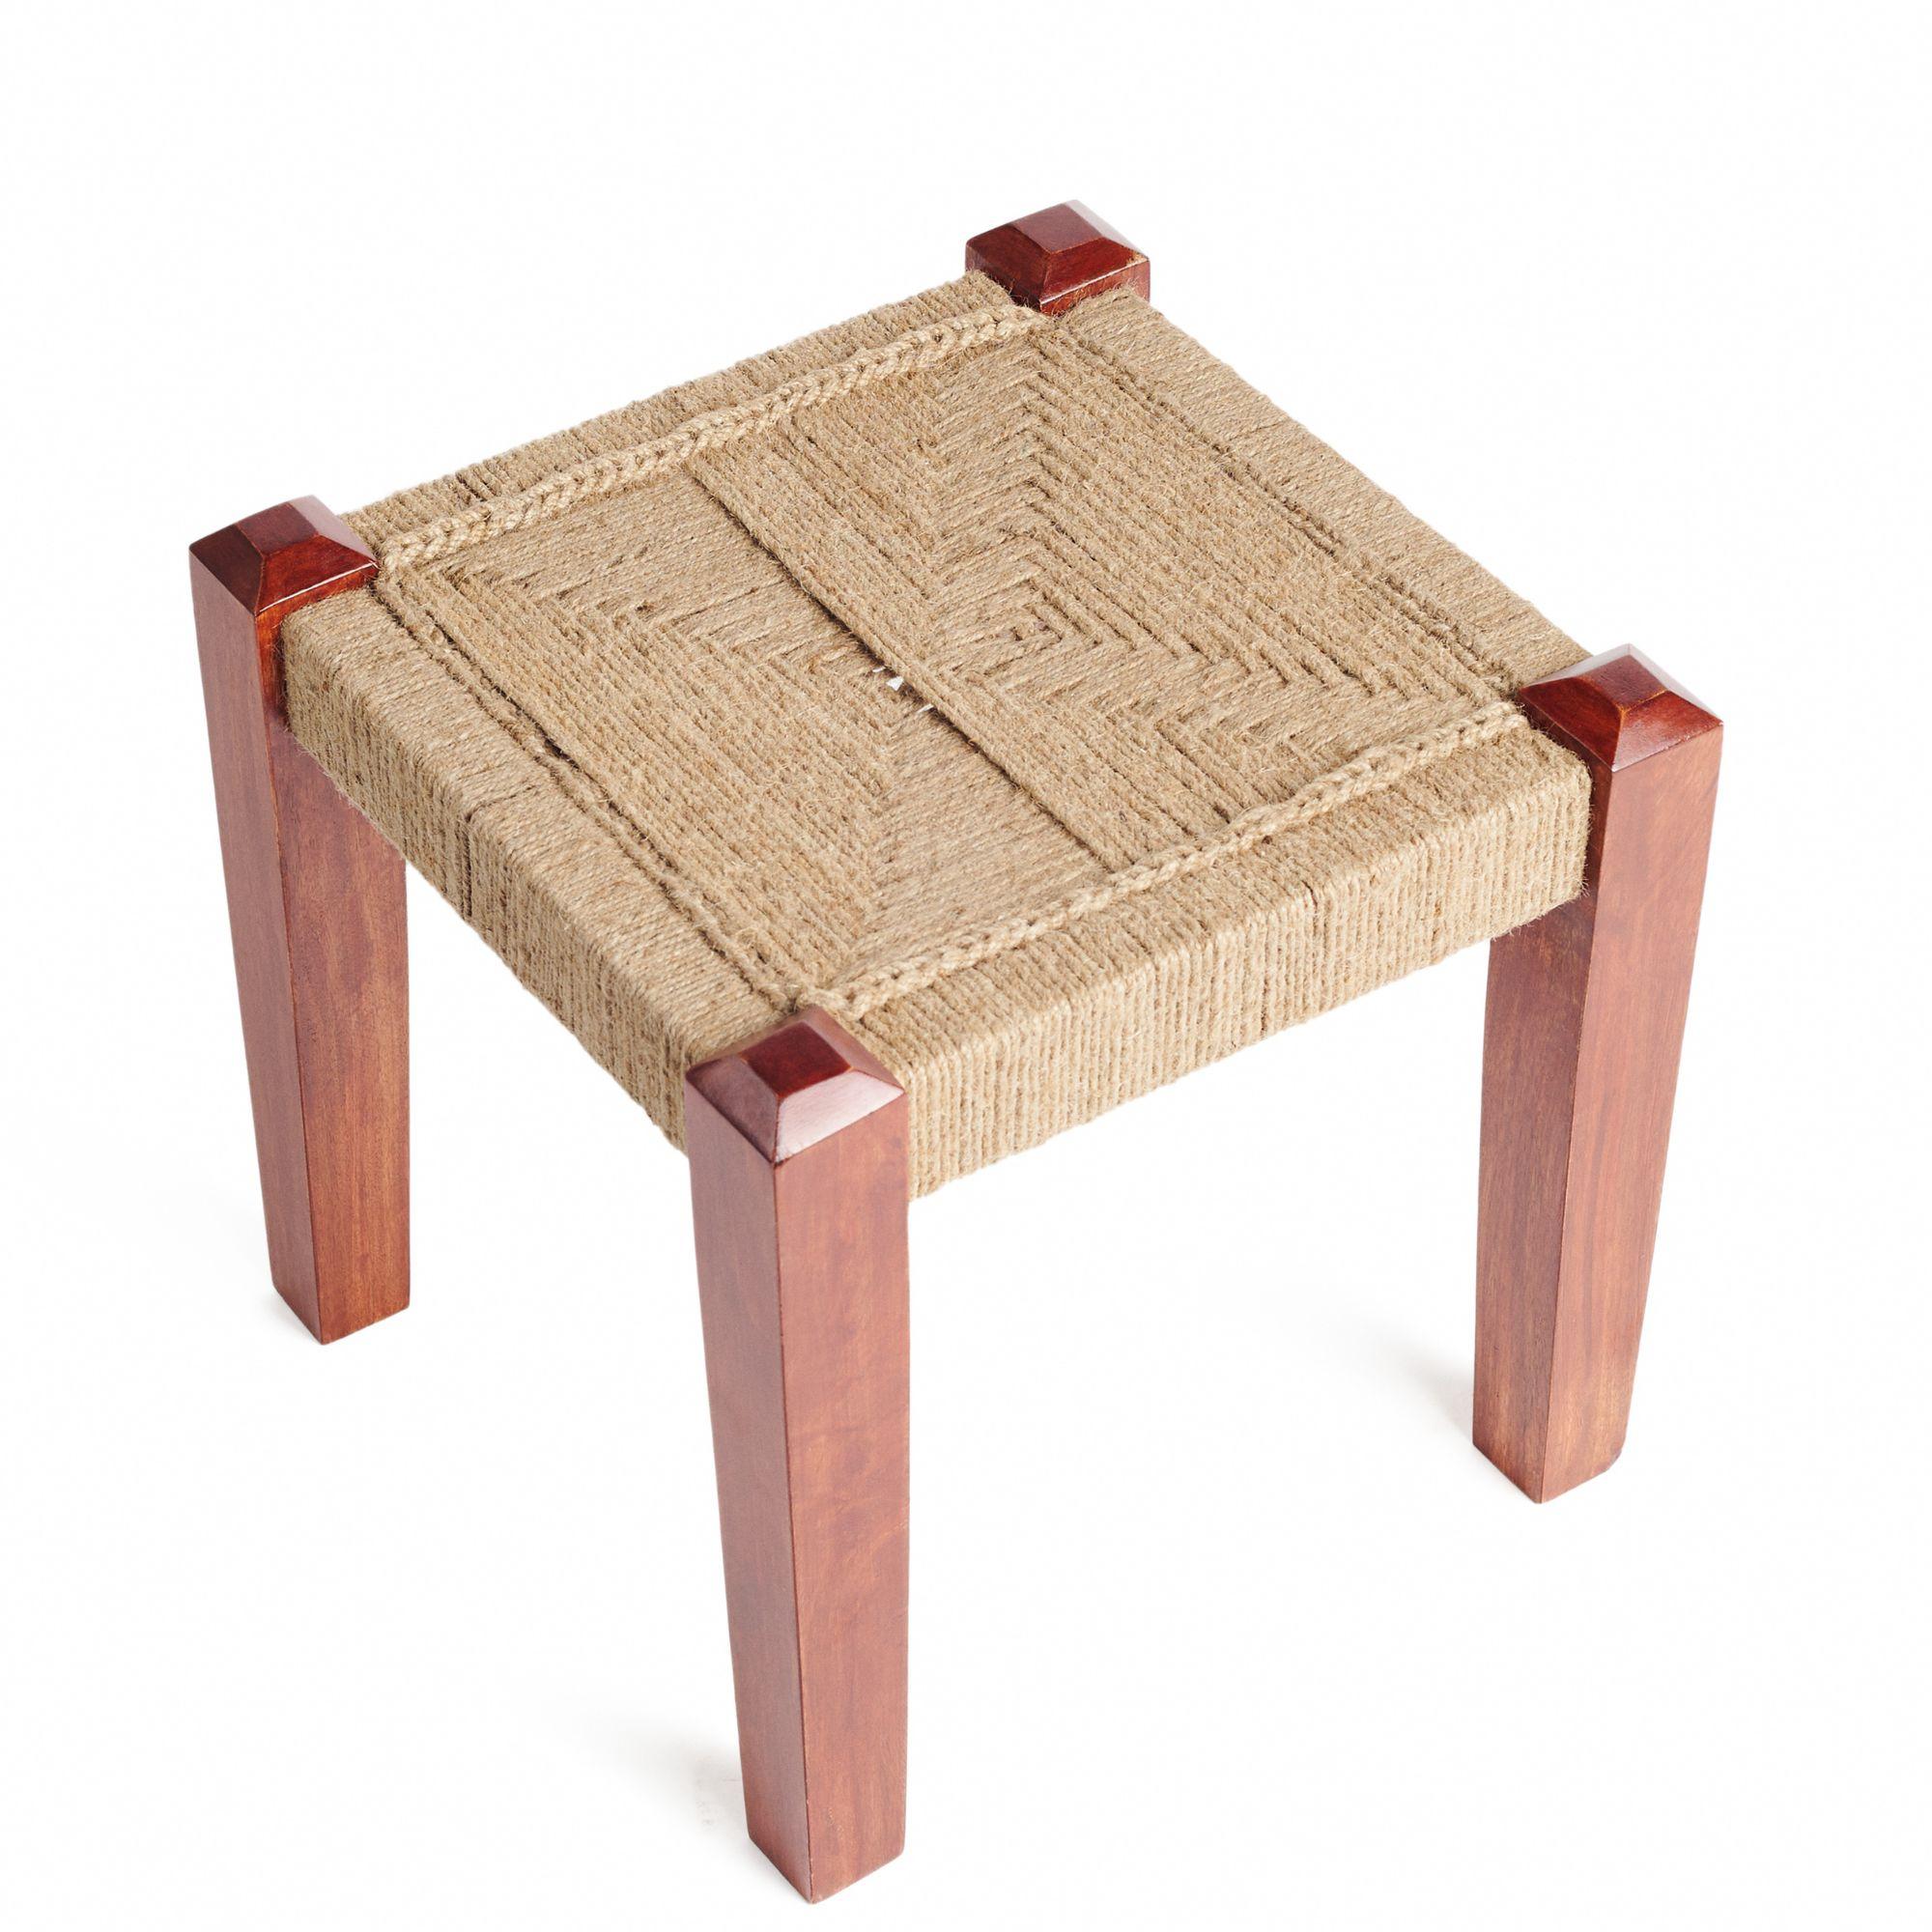 Ālambh Neutral Stool Handwoven in Jute handcrafted by Artisans In New Condition For Sale In Bloomfield Hills, MI